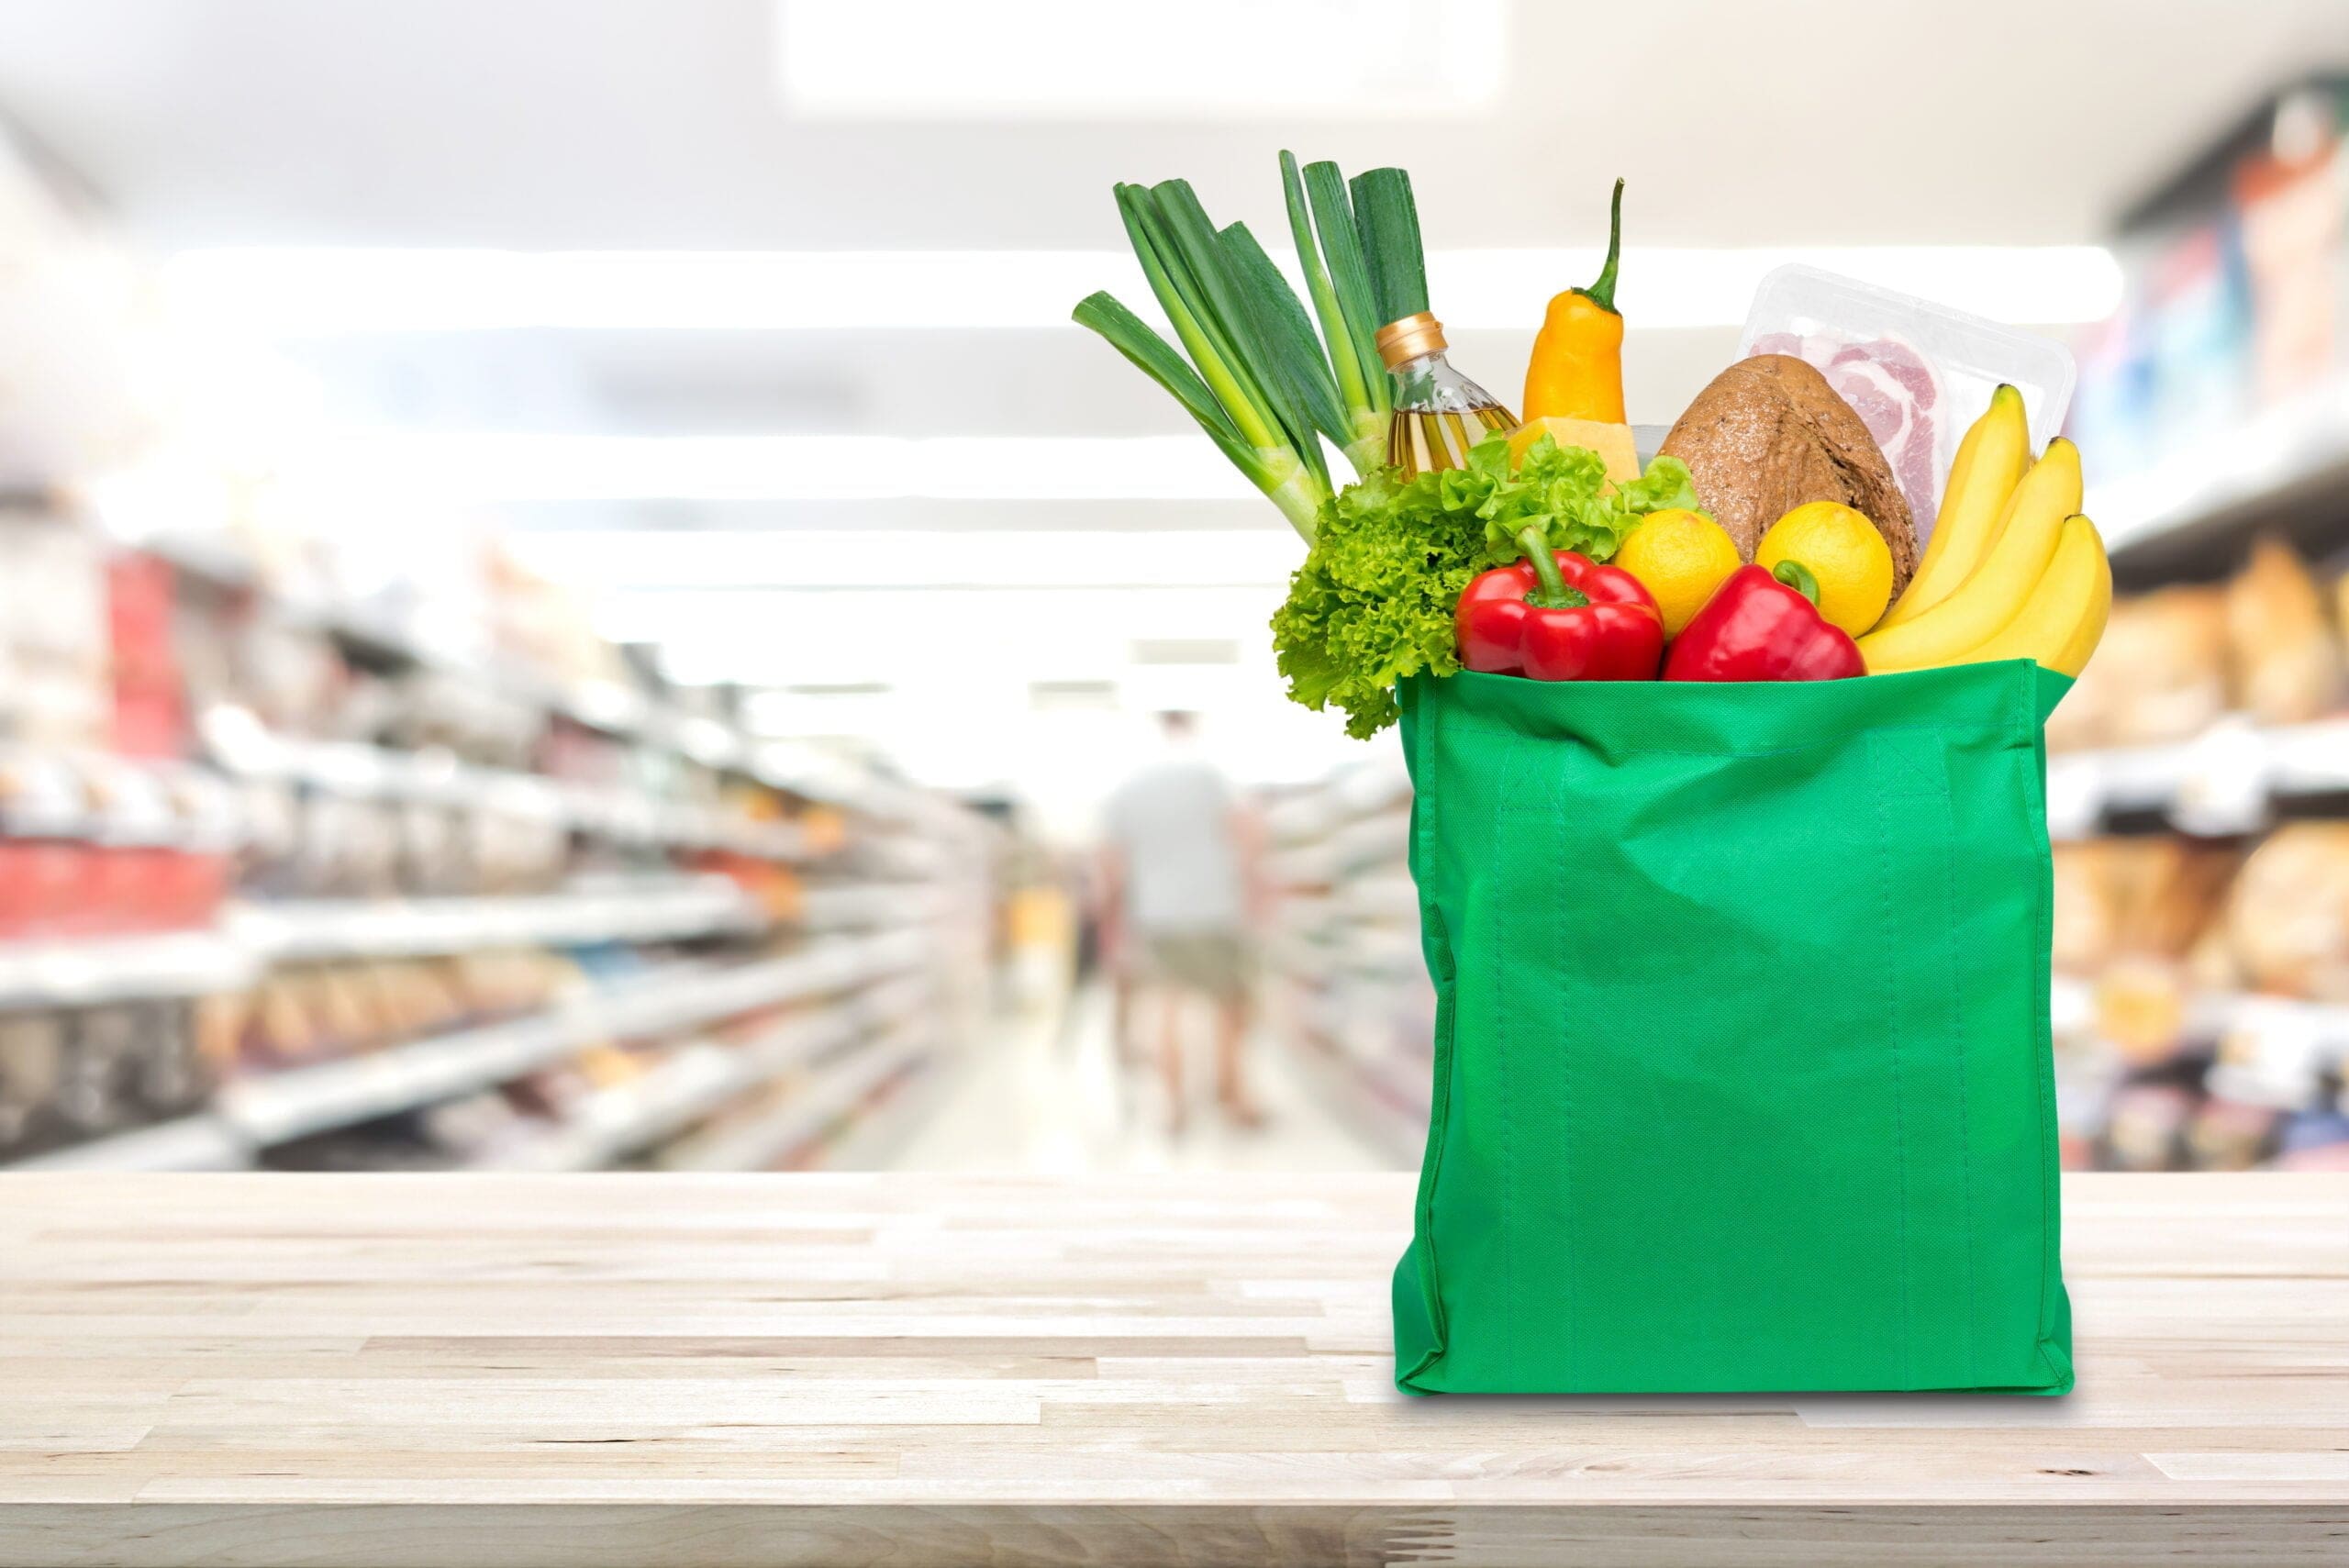 Reusable shopping bag filled with groceries